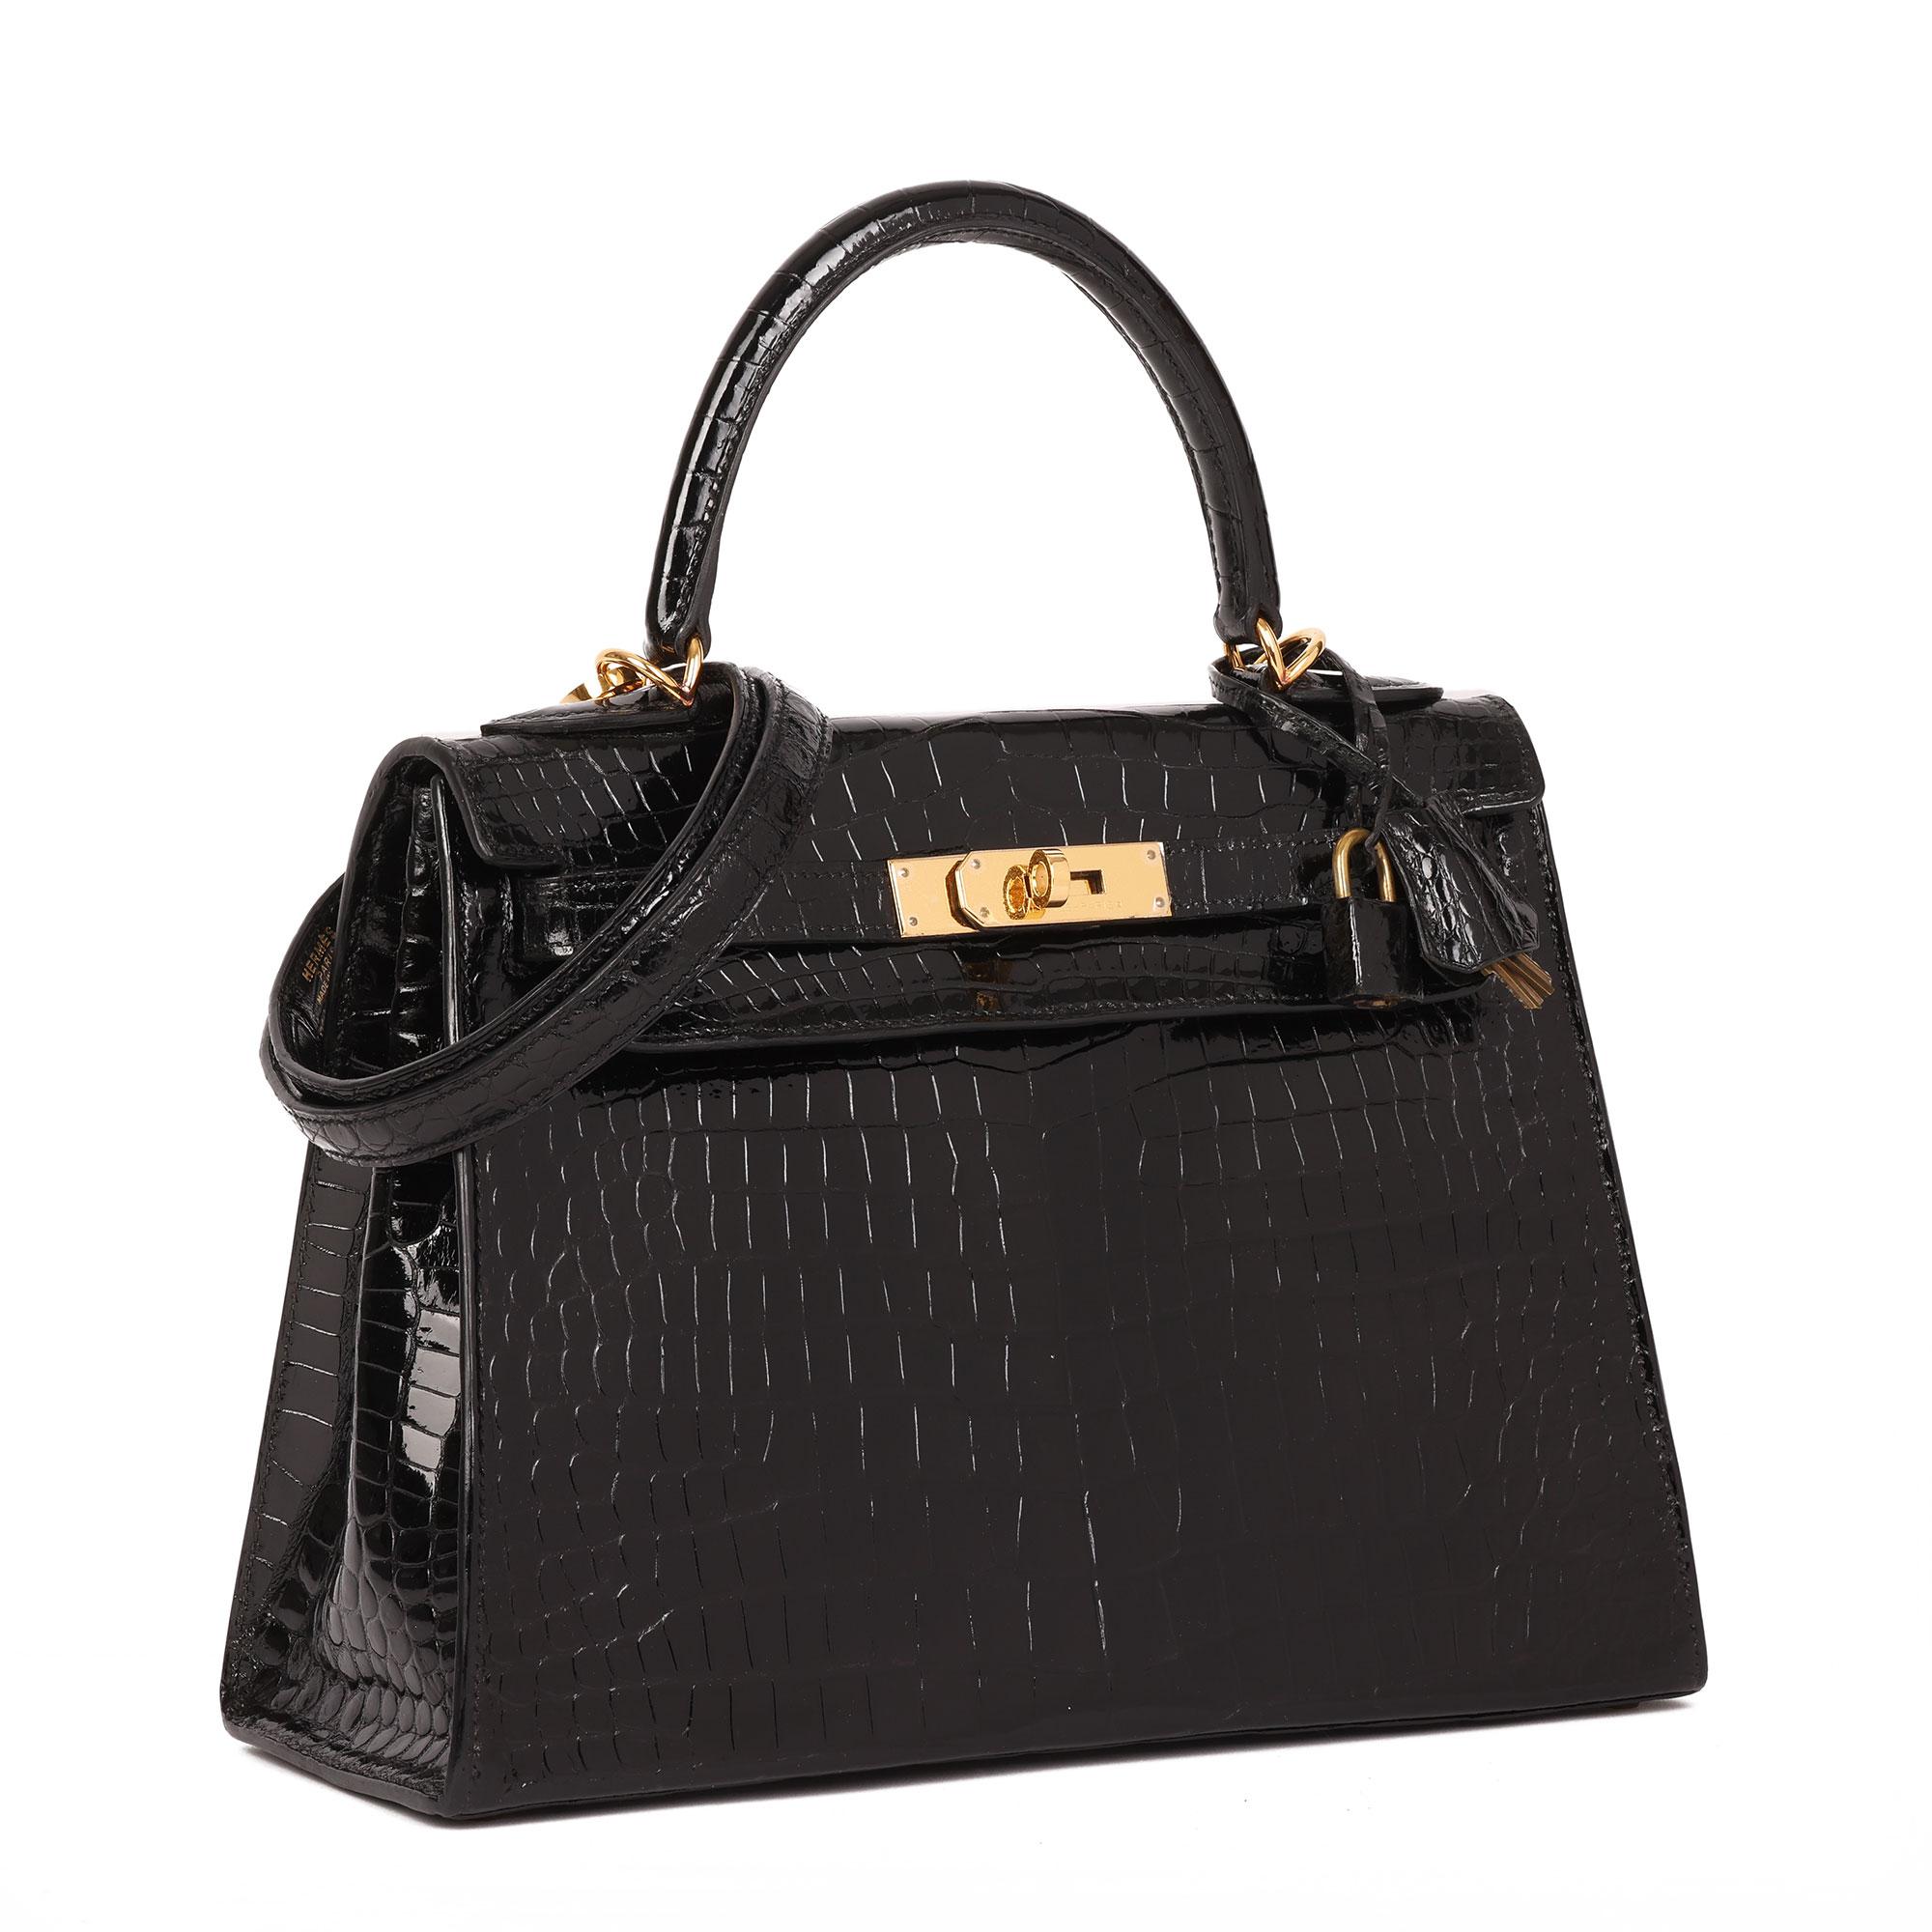 Hermès BLACK SHINY POROSUS CROCODILE LEATHER VINTAGE KELLY 28CM SELLIER

CONDITION NOTES
The exterior is in excellent condition with light signs of use.
The interior is in excellent condition with light signs of use.
The hardware is in excellent